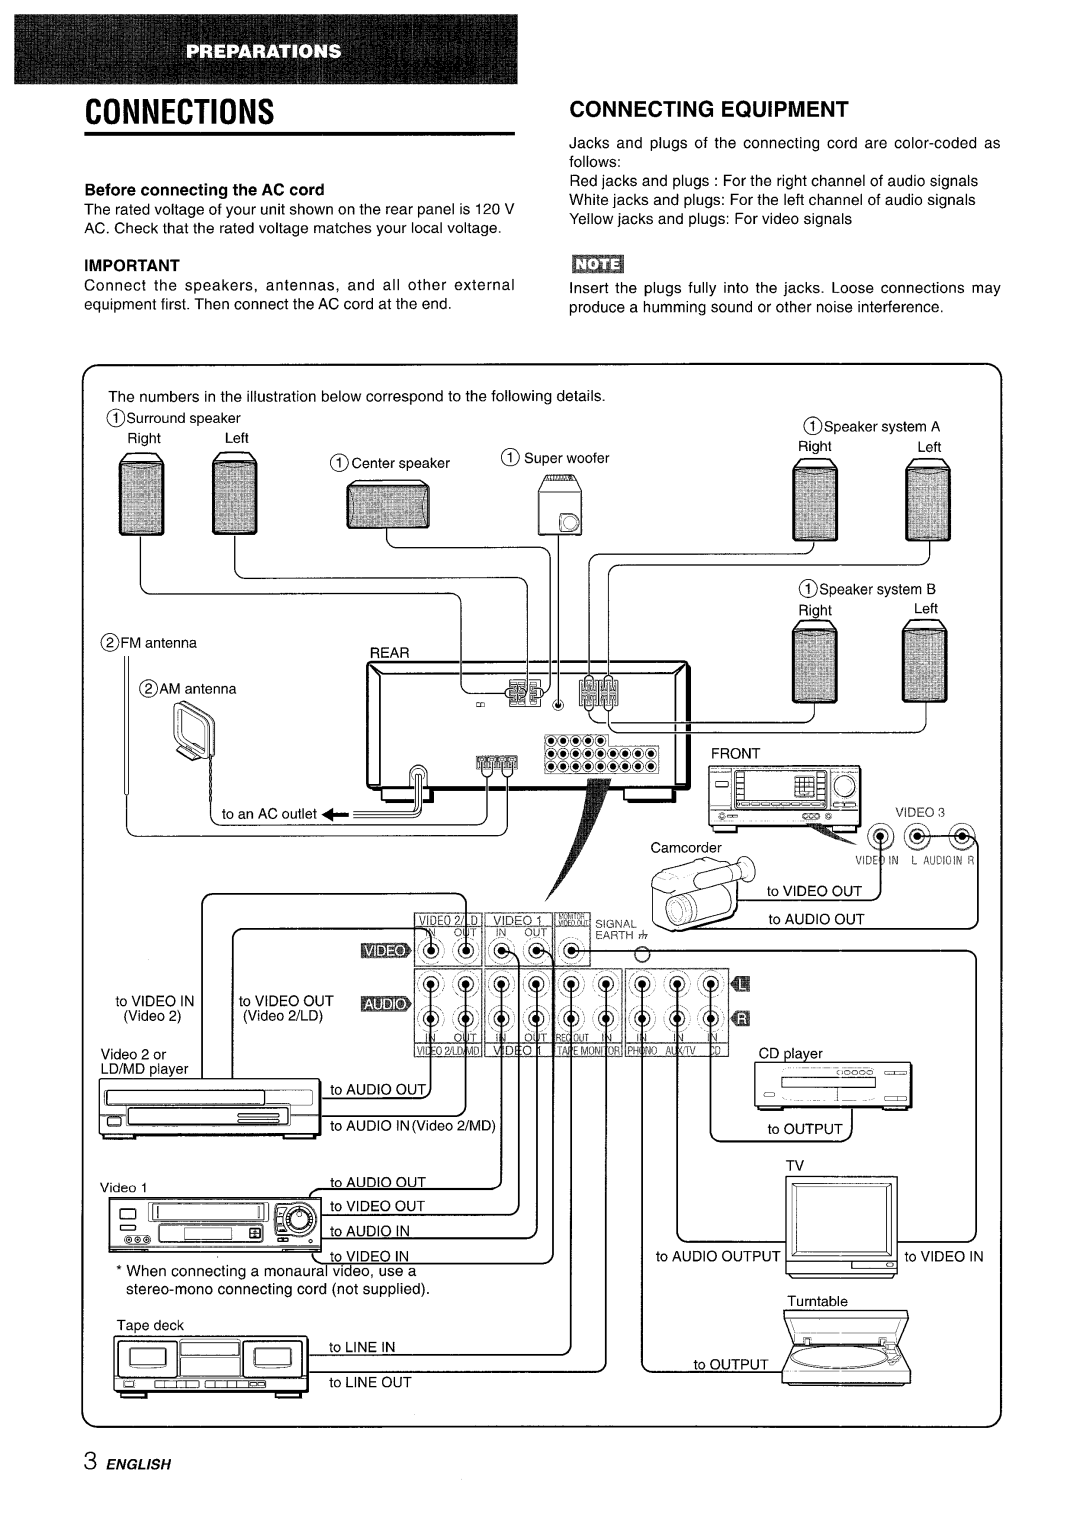 Aiwa AV-X220 manual ‘raeJJ, Connections, Connecting Equipment, 11111, Before connecting the AC cord, ~mwde 